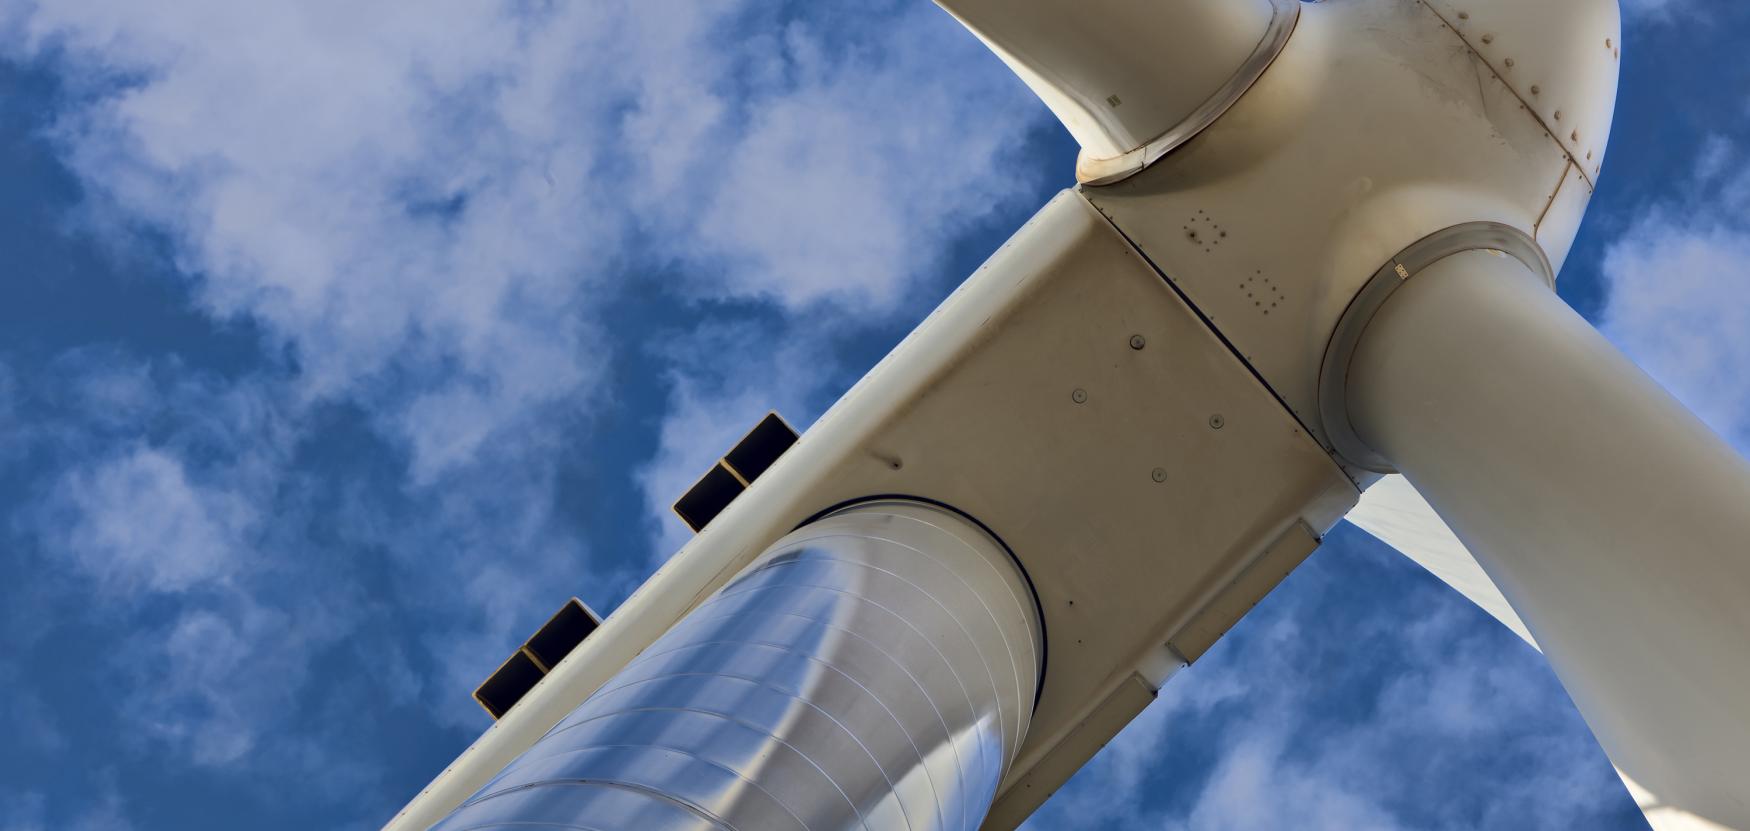 A photo of a wind turbine with blue sky and clouds.